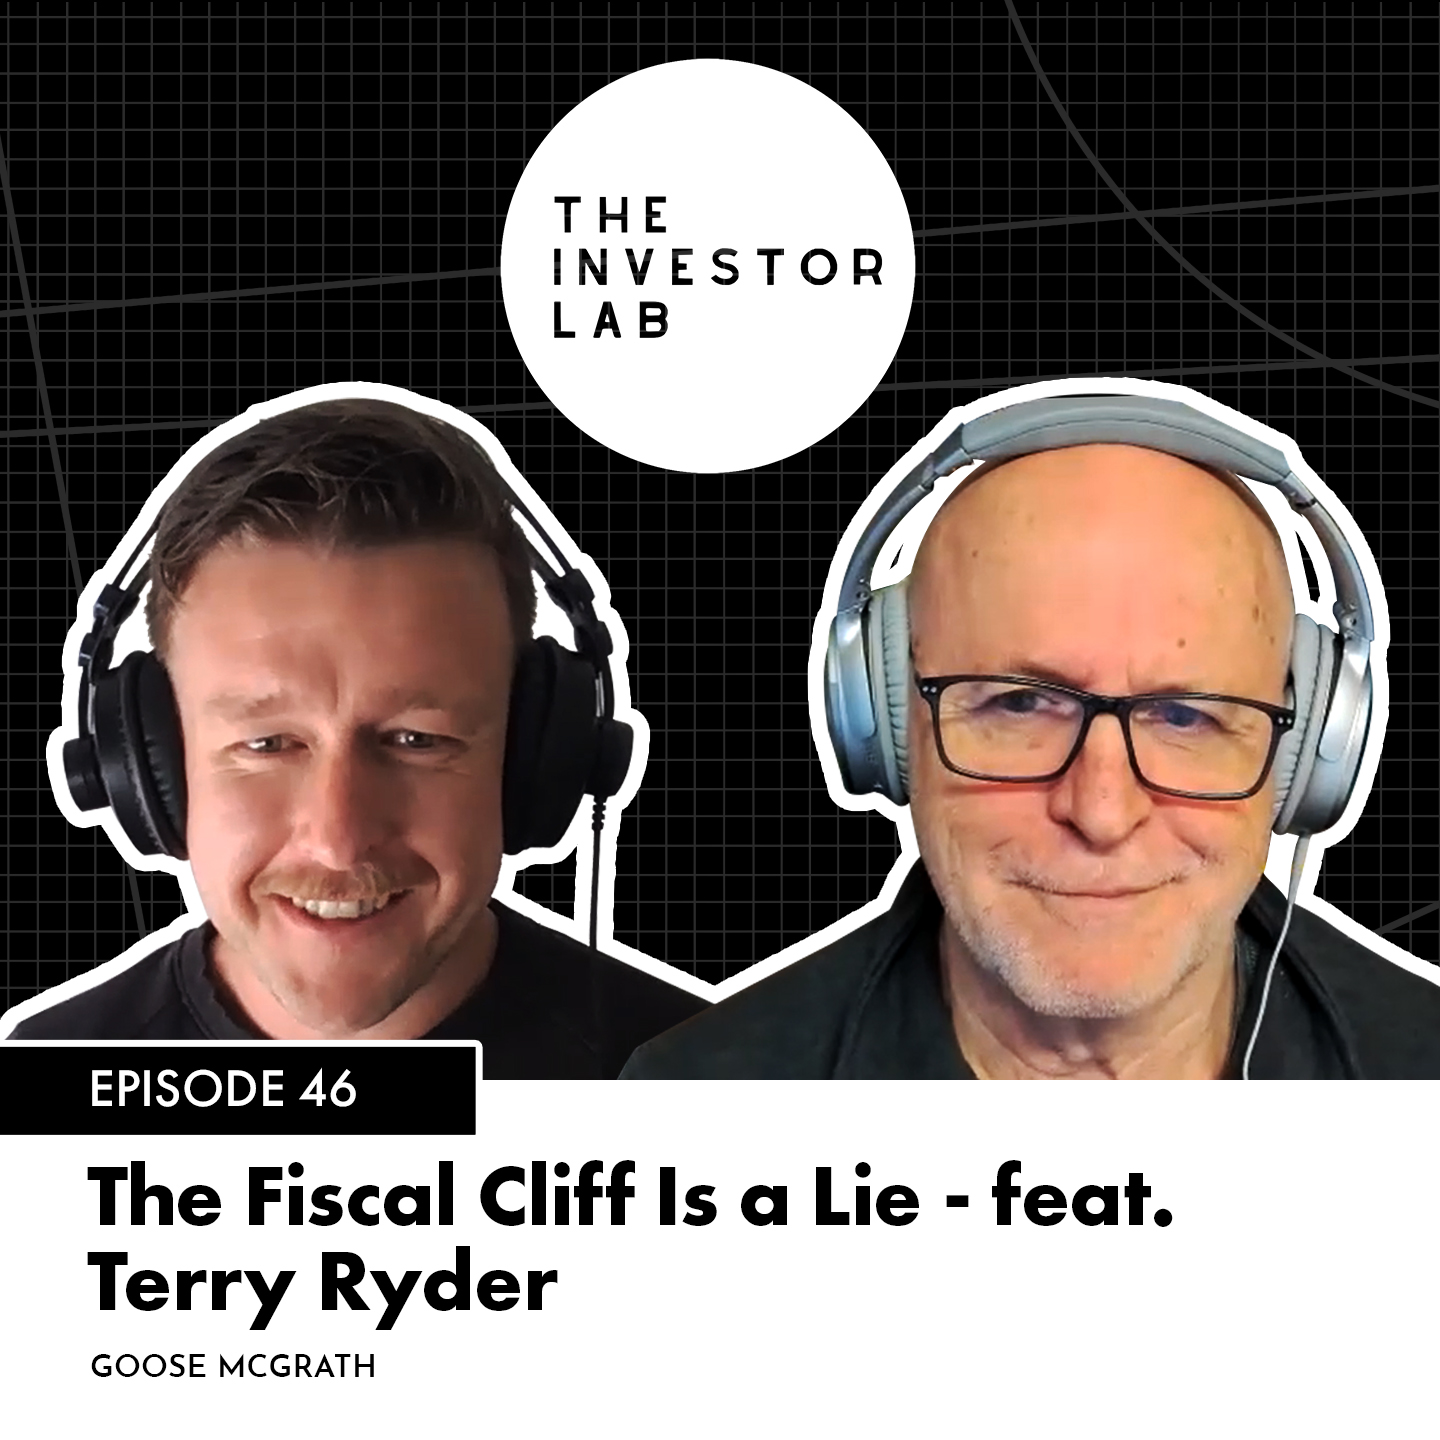 The Fiscal Cliff Is a Lie - feat. Terry Ryder